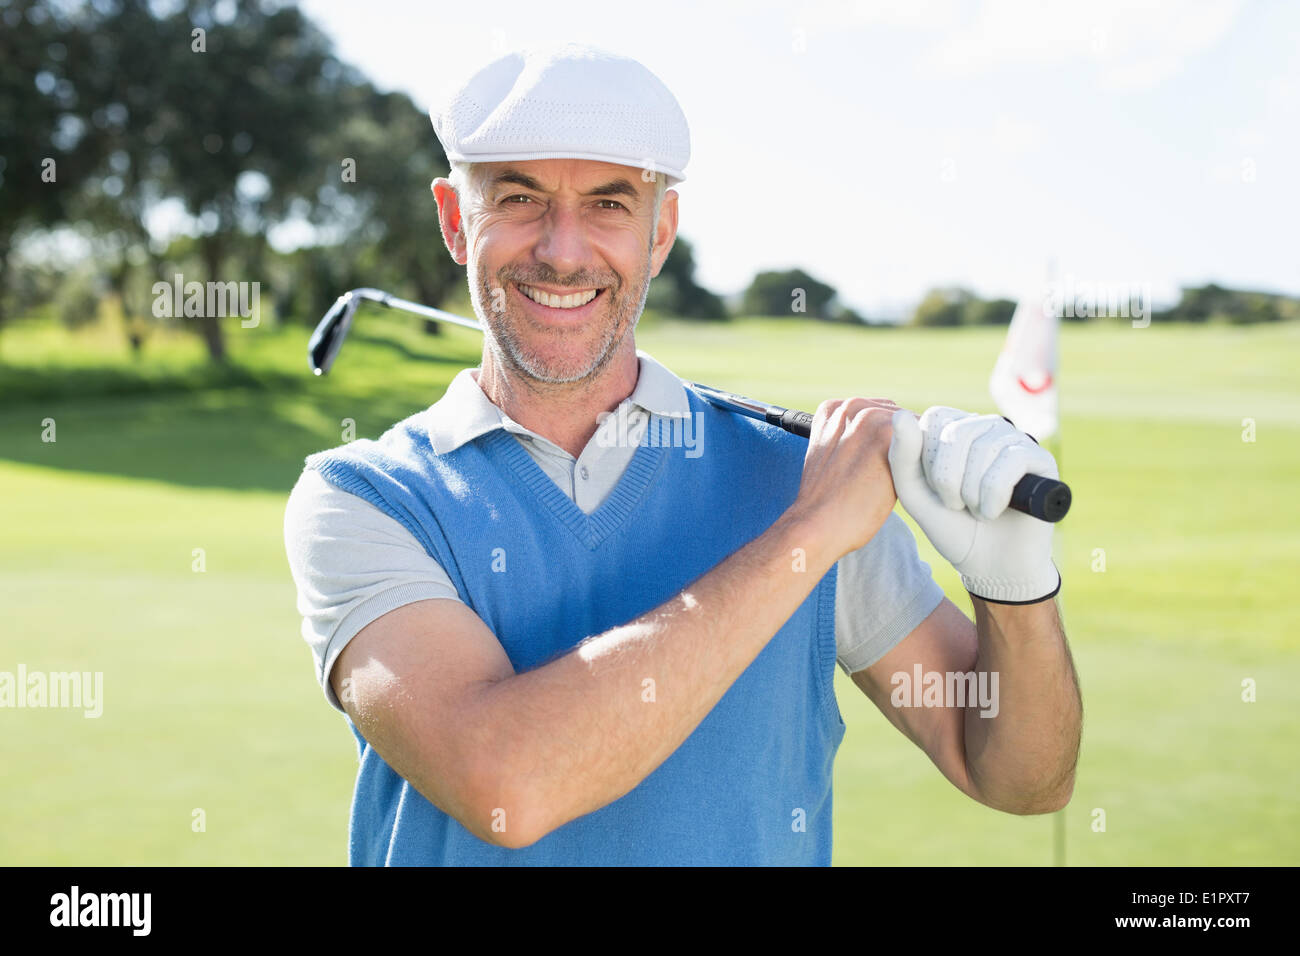 Golfer standing and swinging his club smiling at camera Stock Photo - Alamy